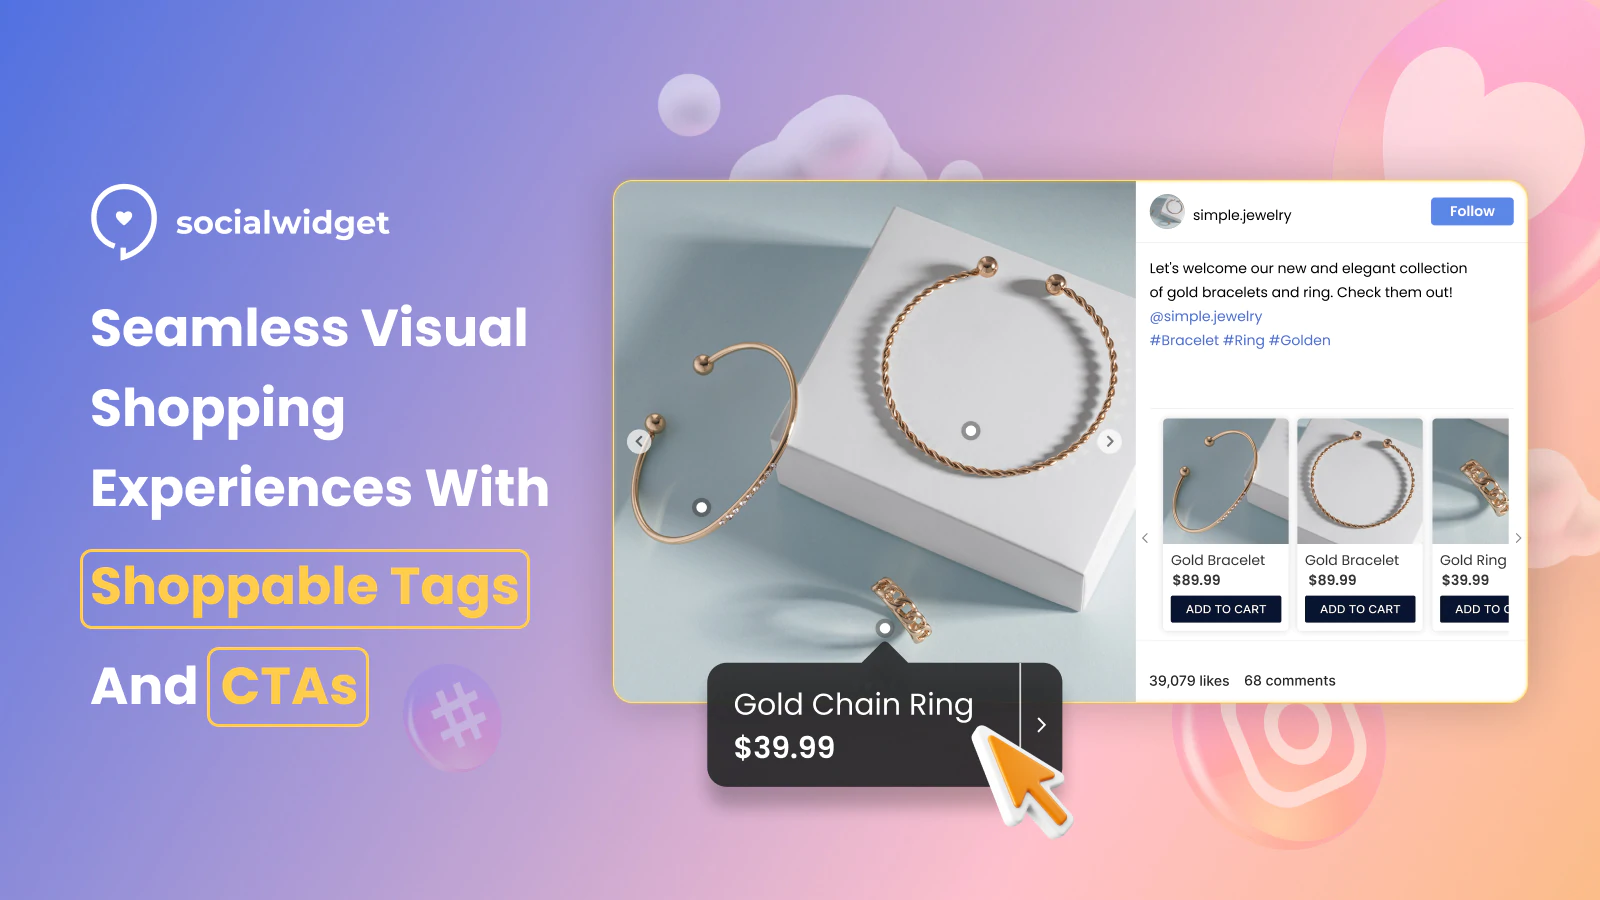 A visual of the social widget tool on an ombre background next to the text, seamless visual shopping experiences with shoppable tags and CTAs